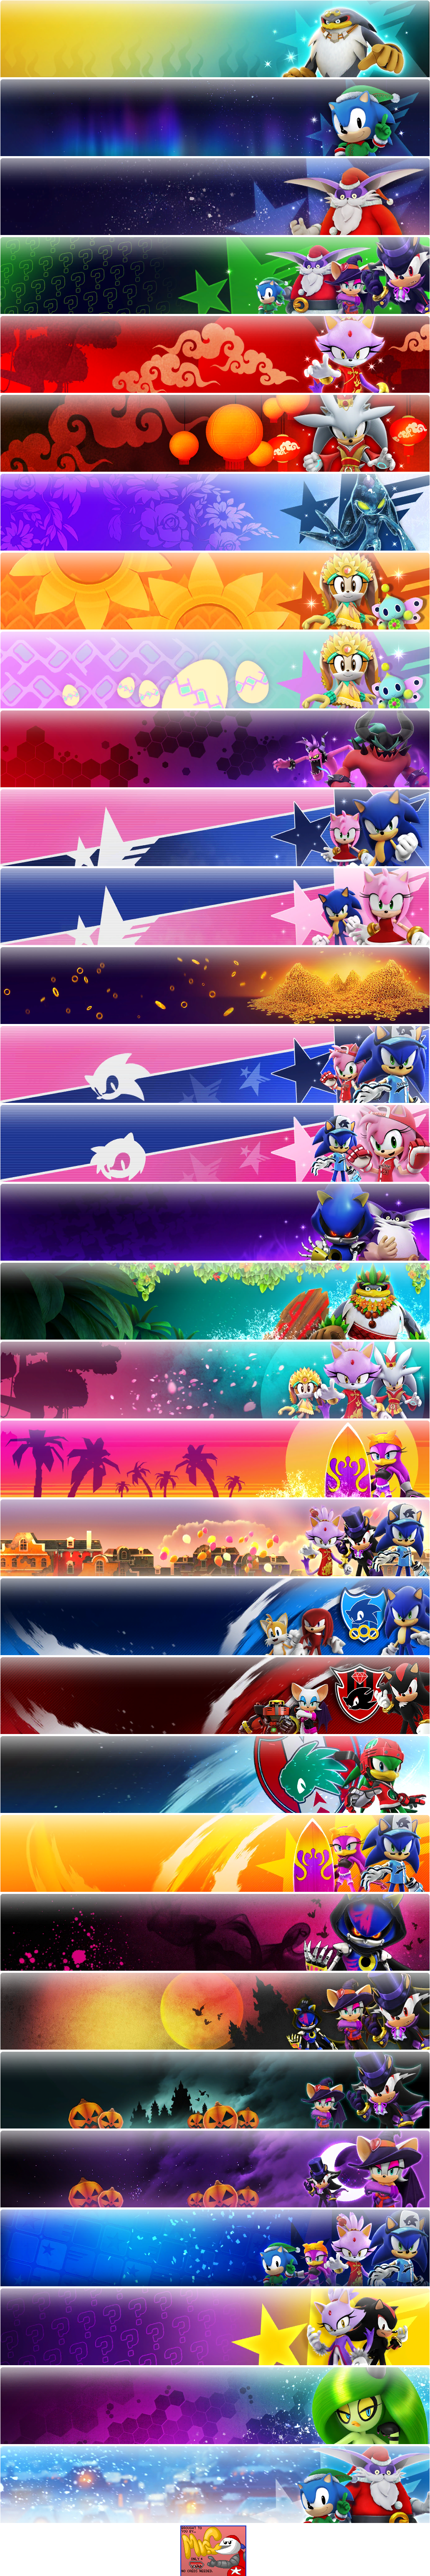 Event Banners (2018 / 2019)